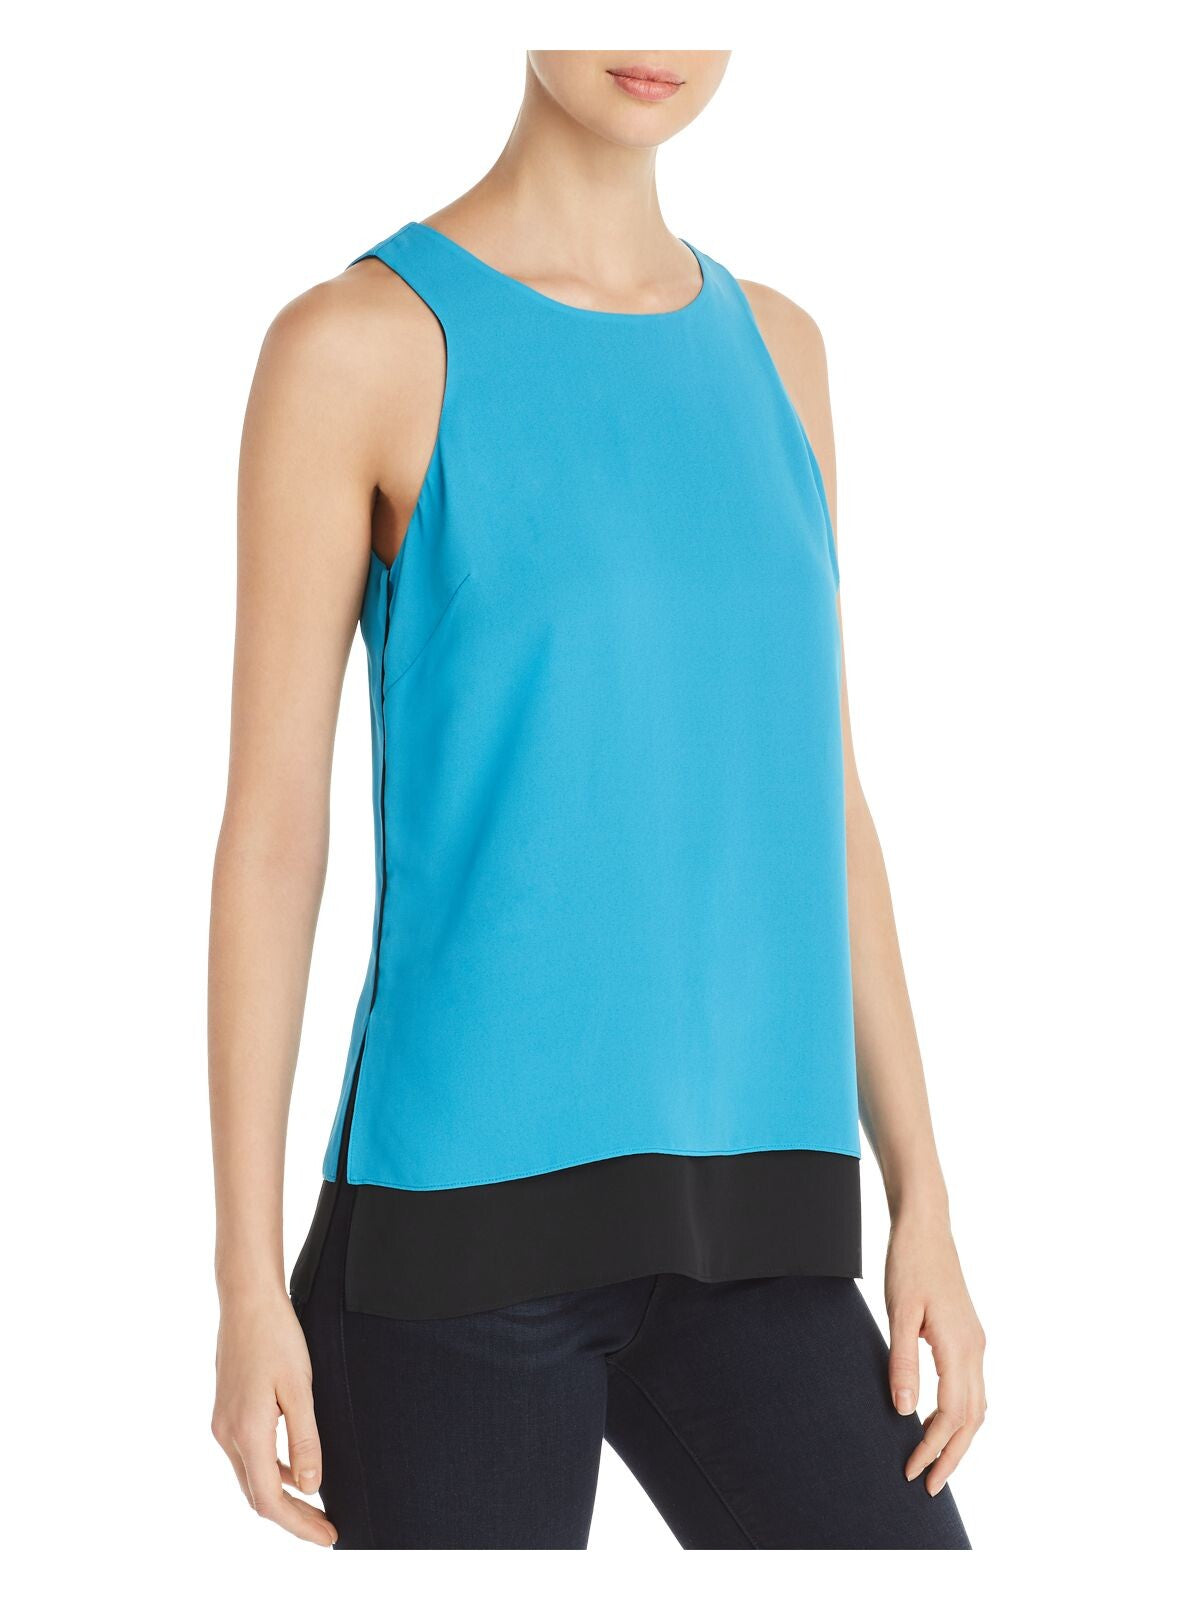 LE GALI Womens Blue Tie Solid Sleeveless Jewel Neck Top Size: S